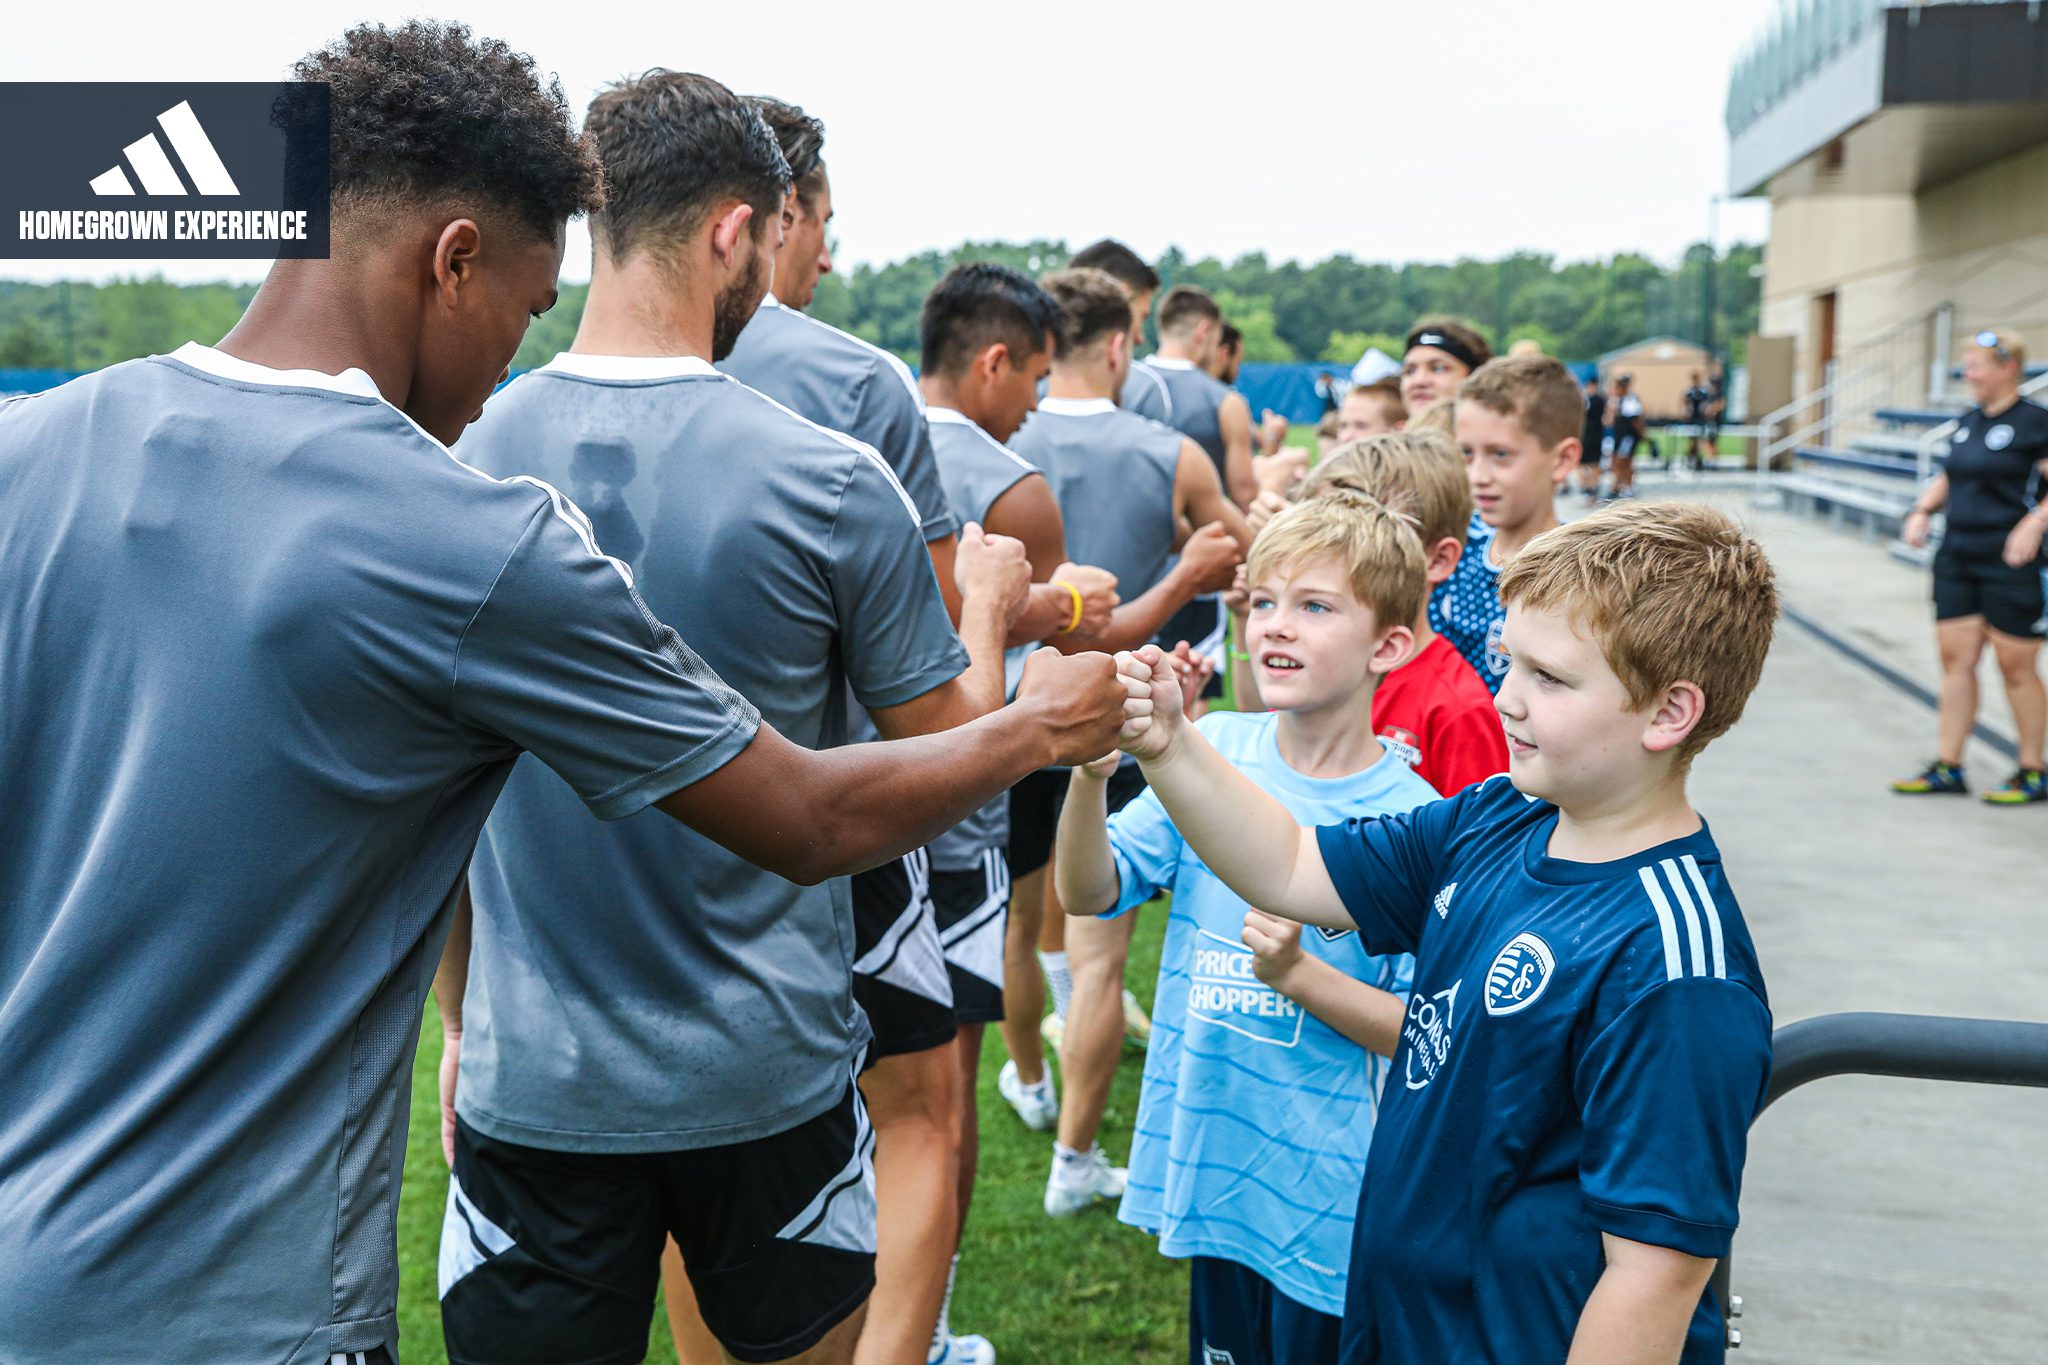 Sporting KC Youth Soccer